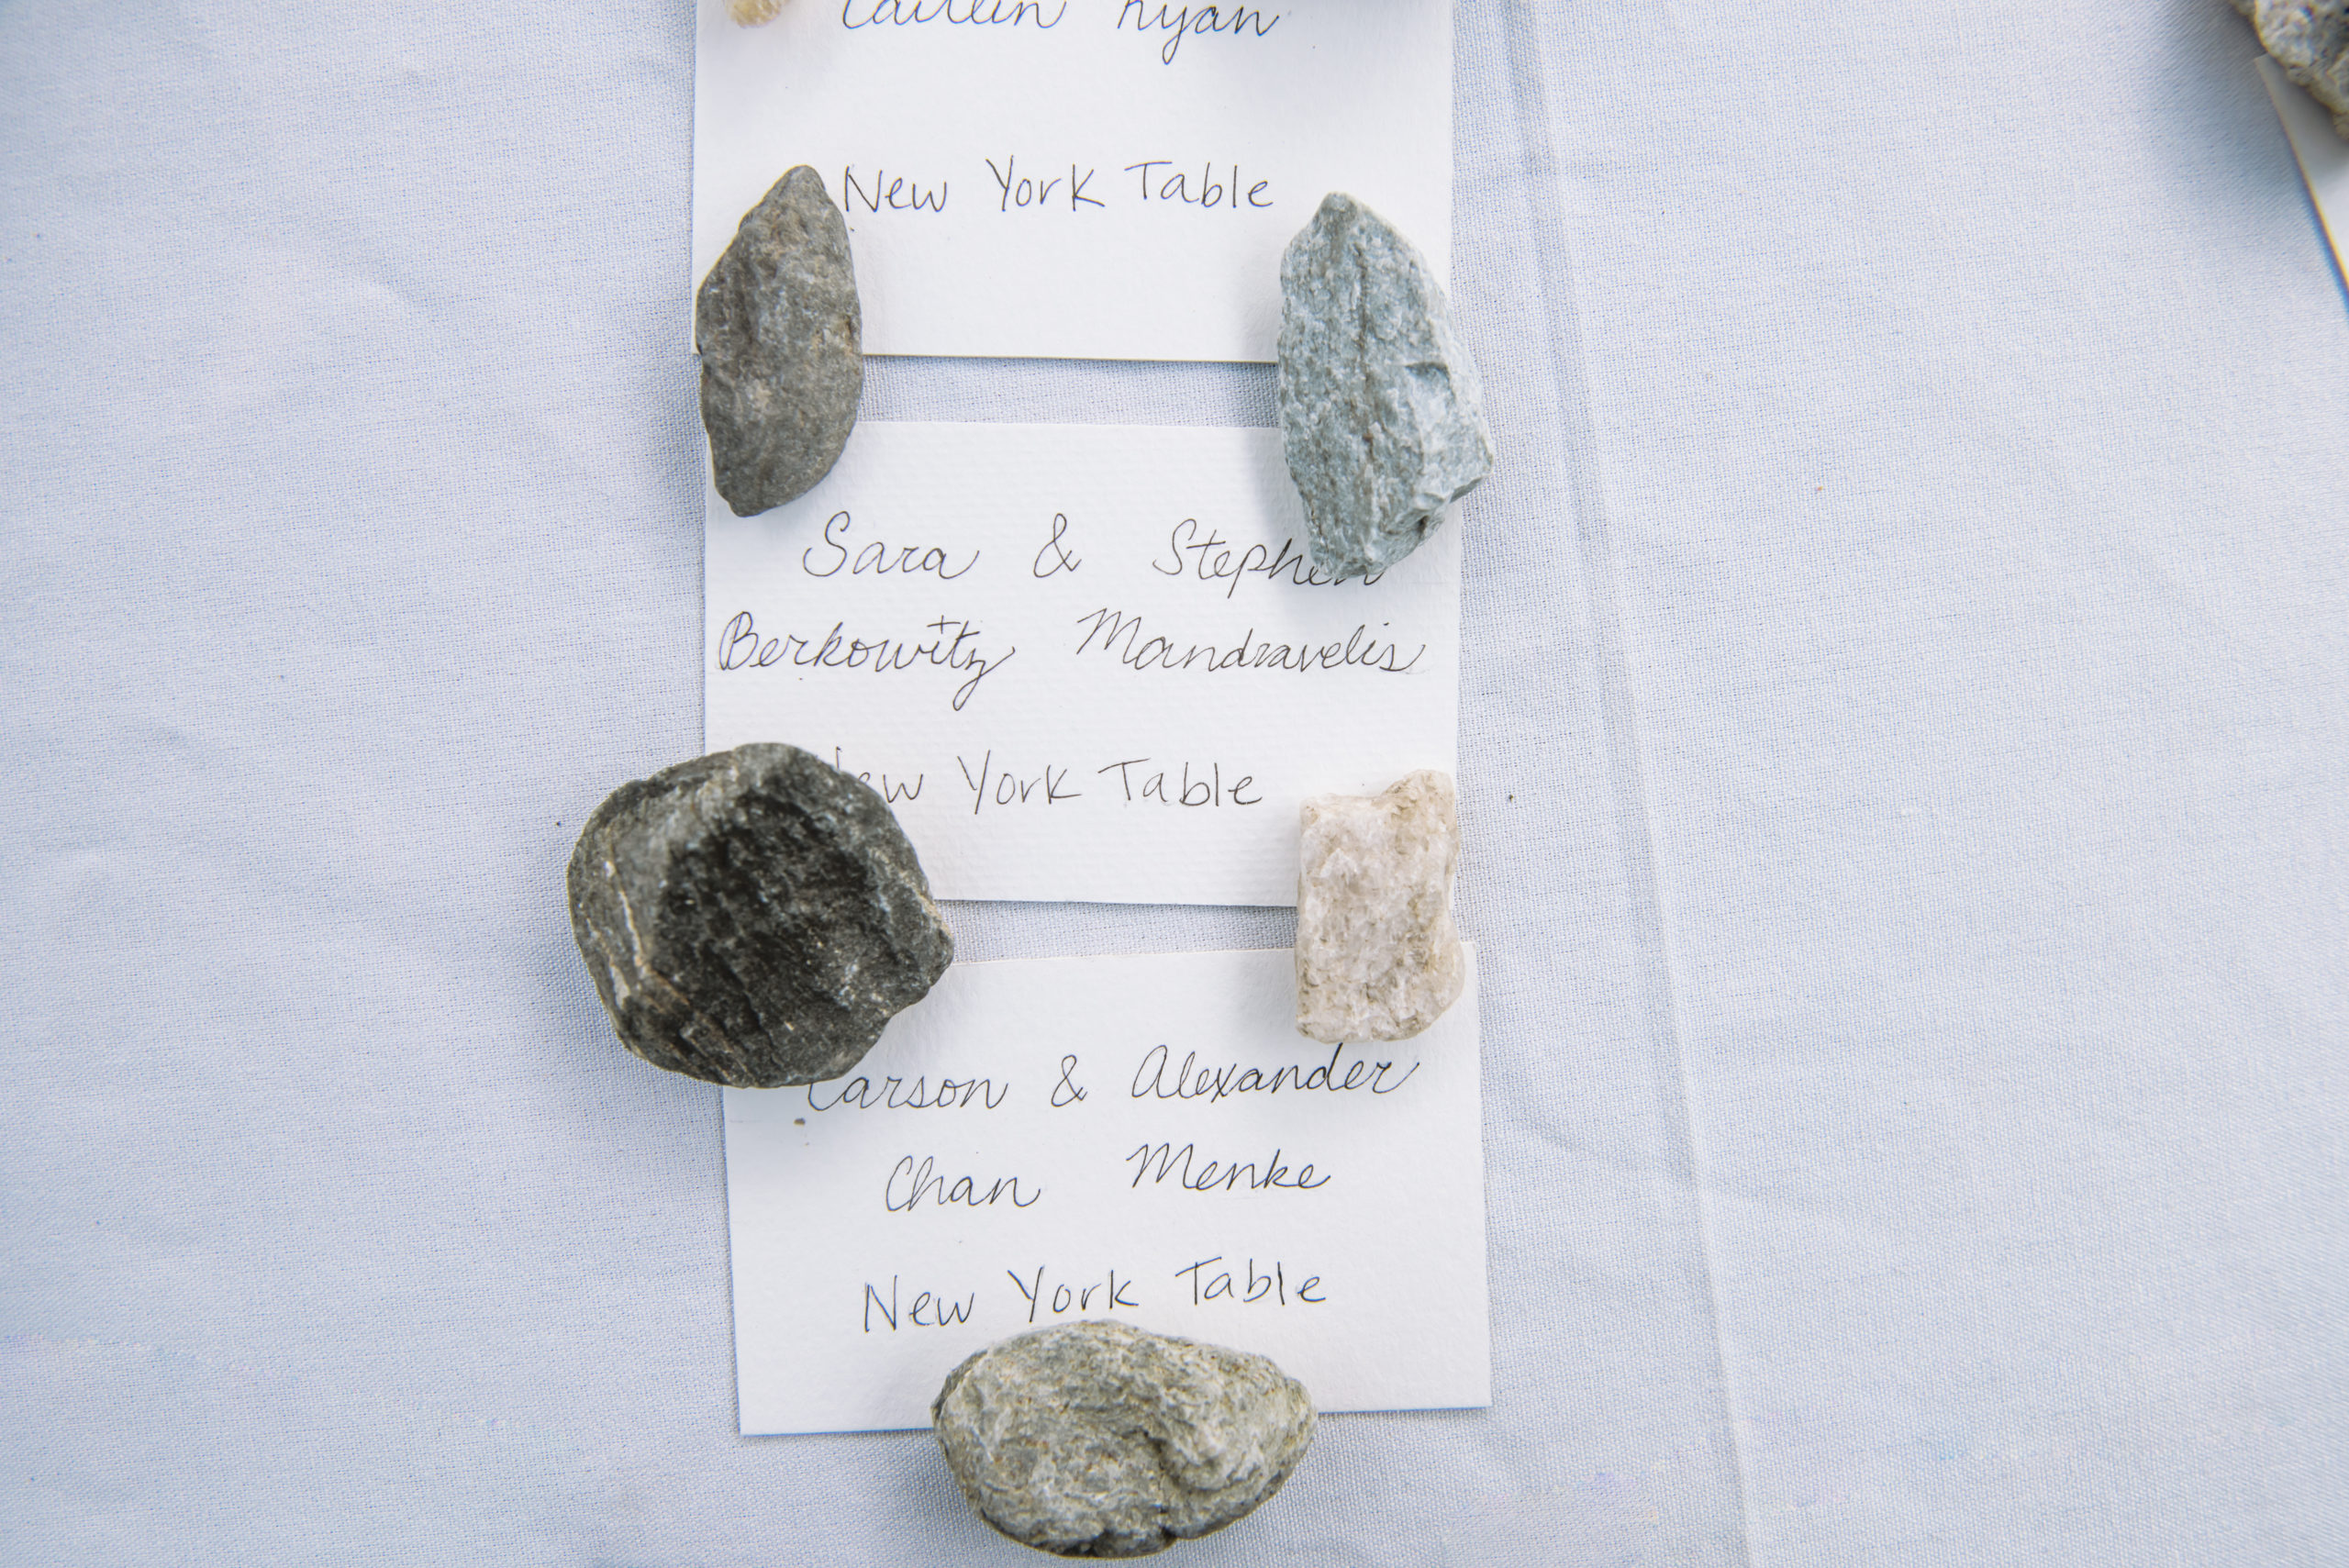 Hand written escort cards featuring natural stones as paperweights on a white table cloth.